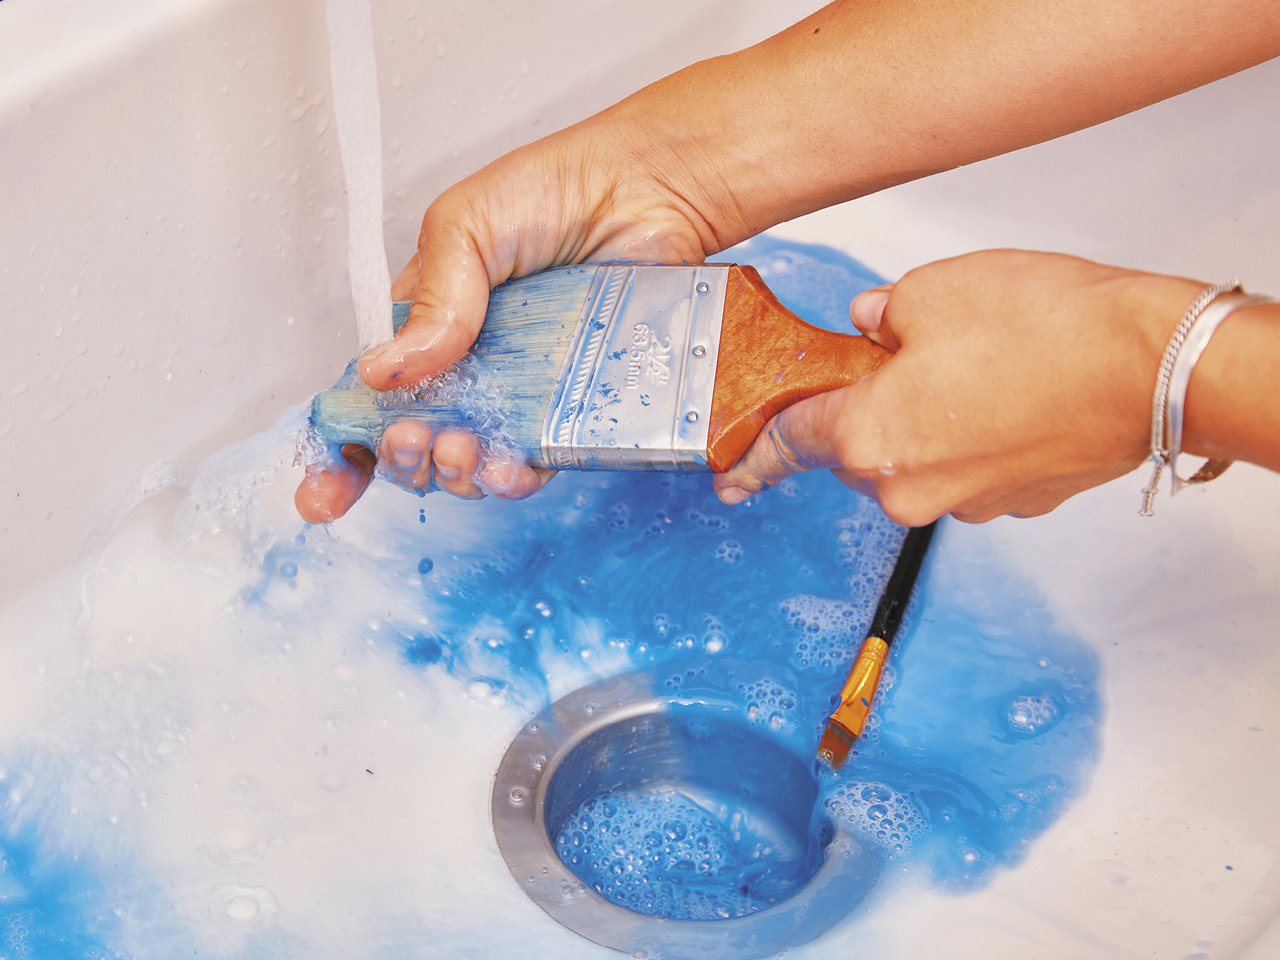 A pair of hands cleaning blue paint off a paint brush over a sink with running water.